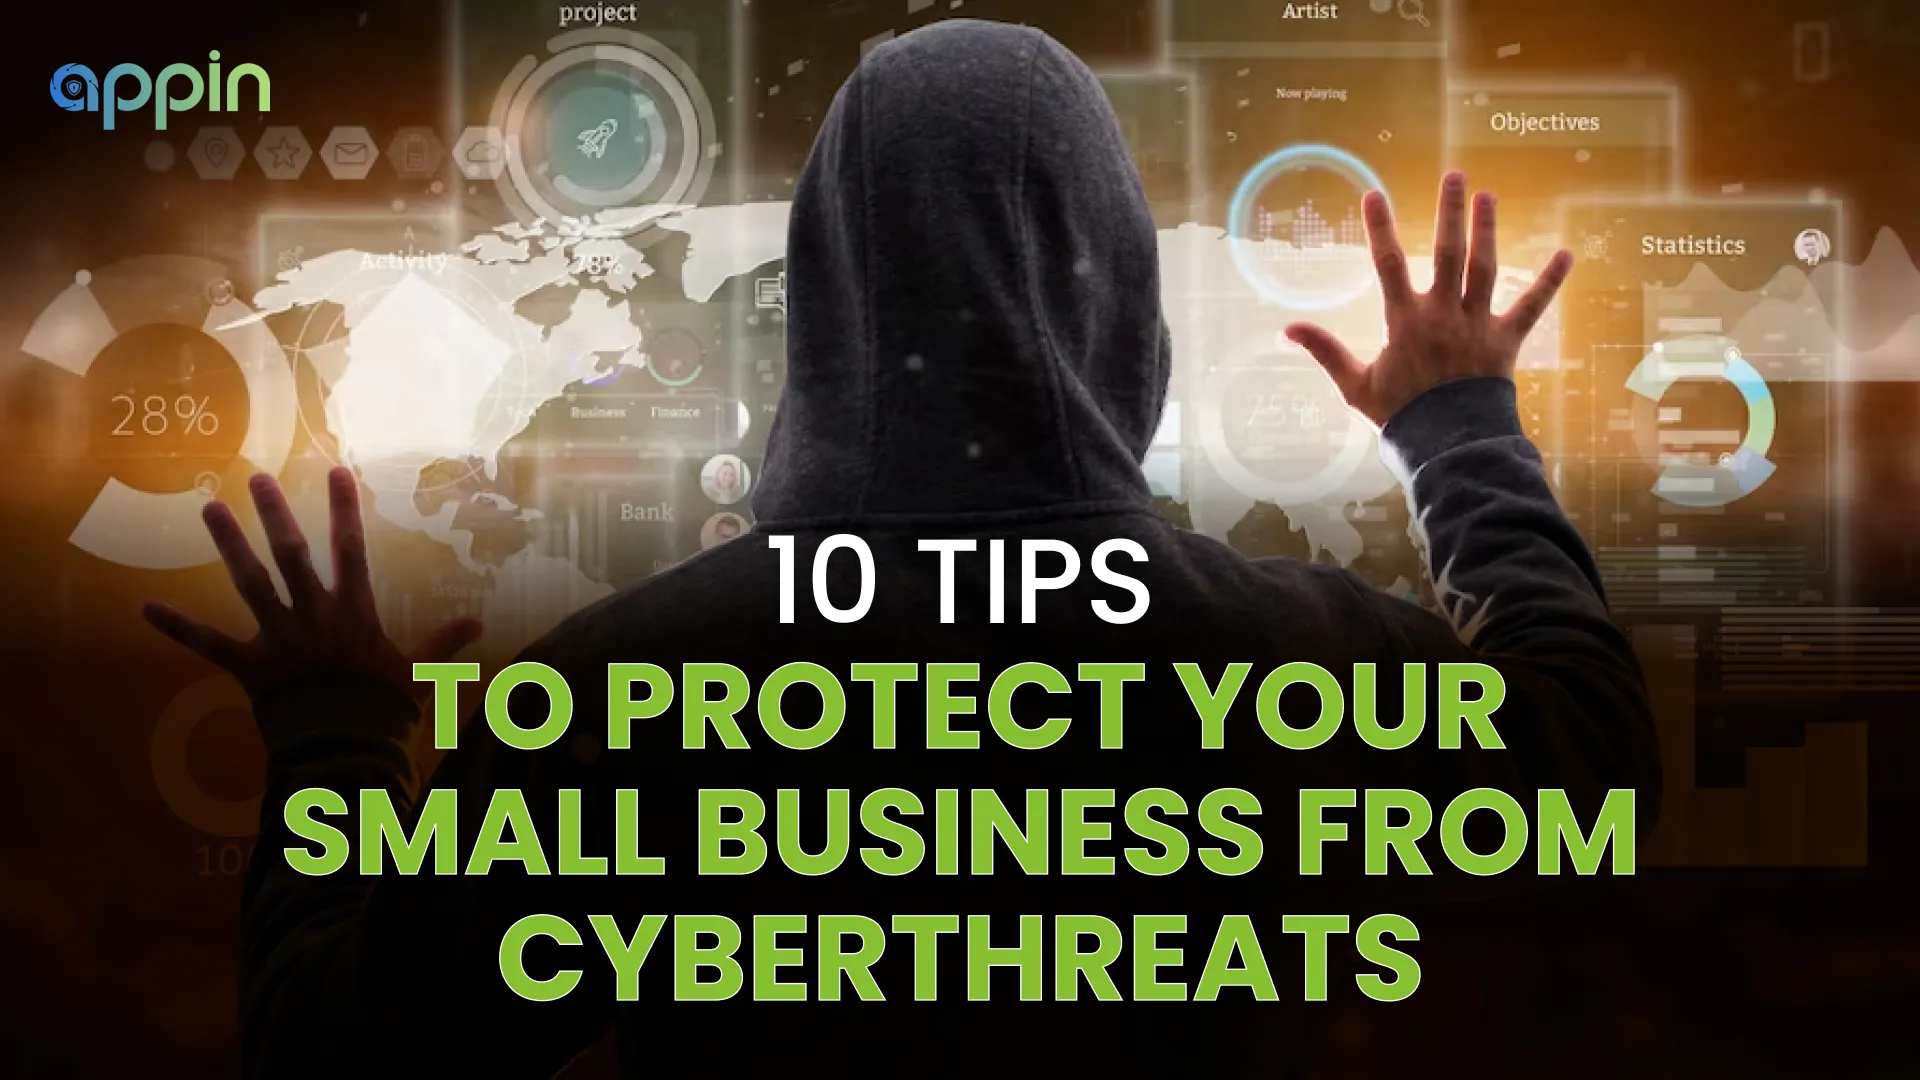 10 Tips to protect your small business from cyber threats